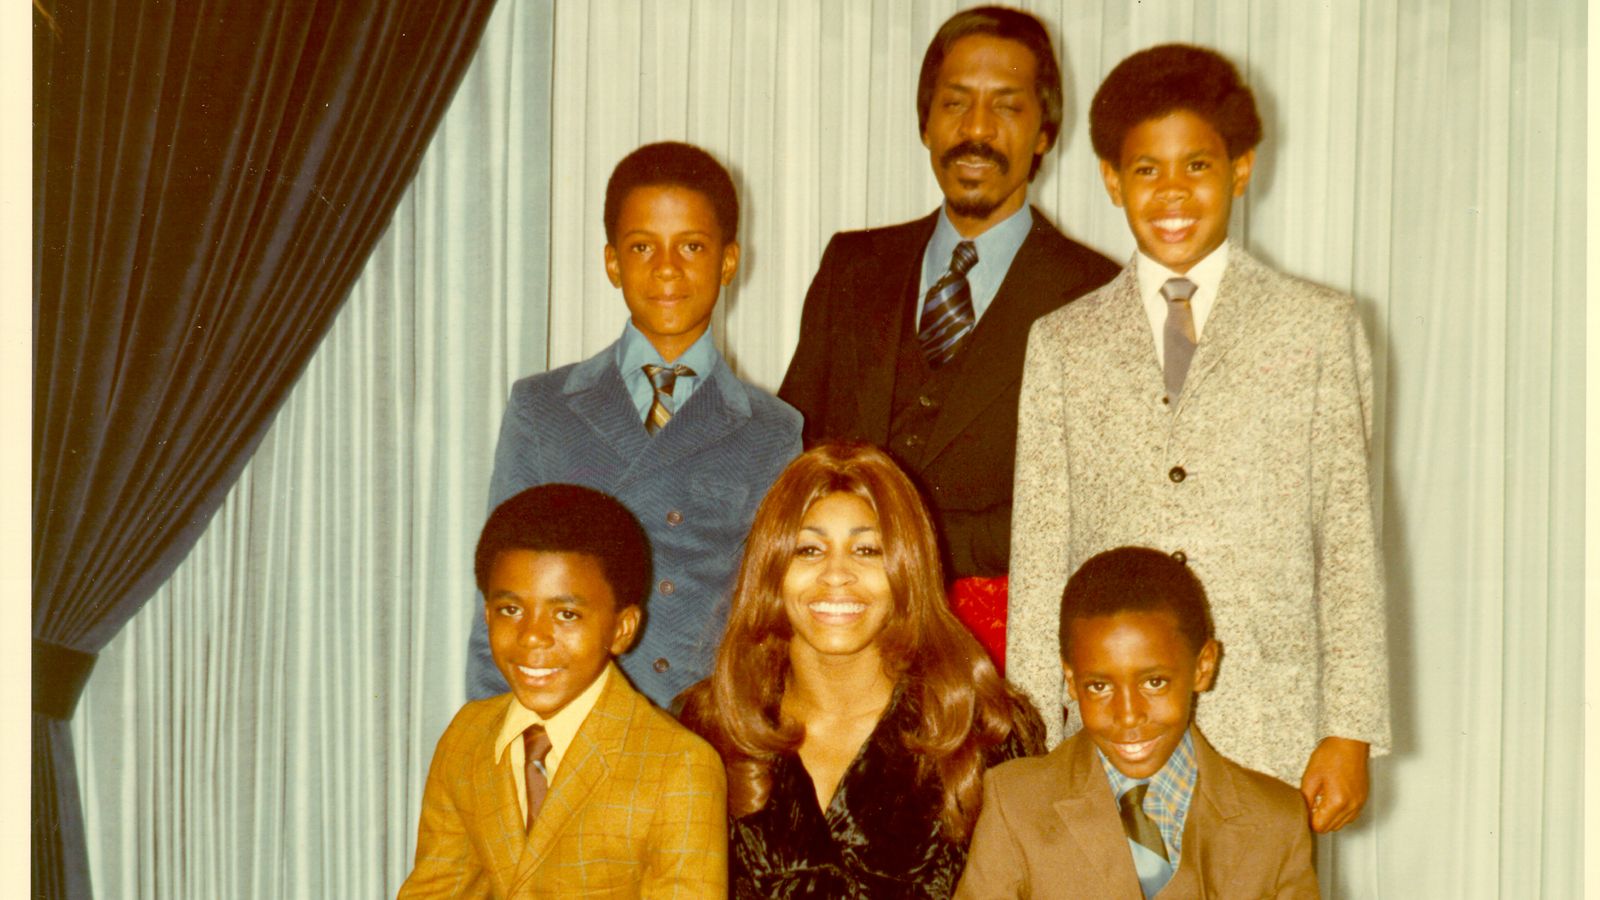 The tragic story of Tina Turner's sons